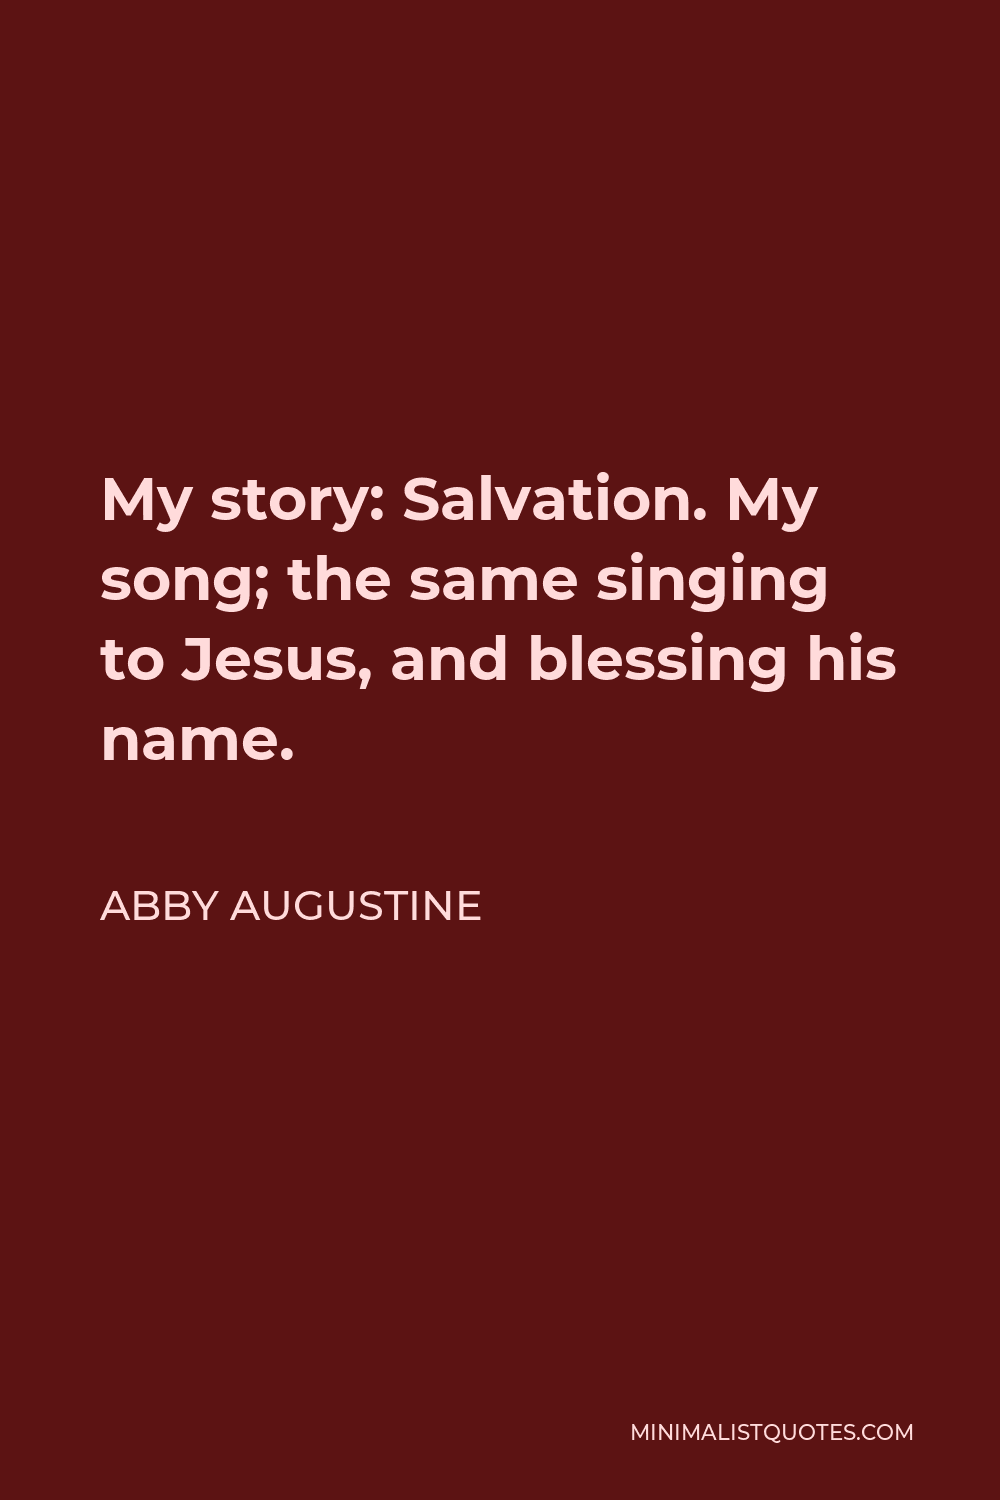 Abby Augustine Quote - My story: Salvation. My song; the same singing to Jesus, and blessing his name.